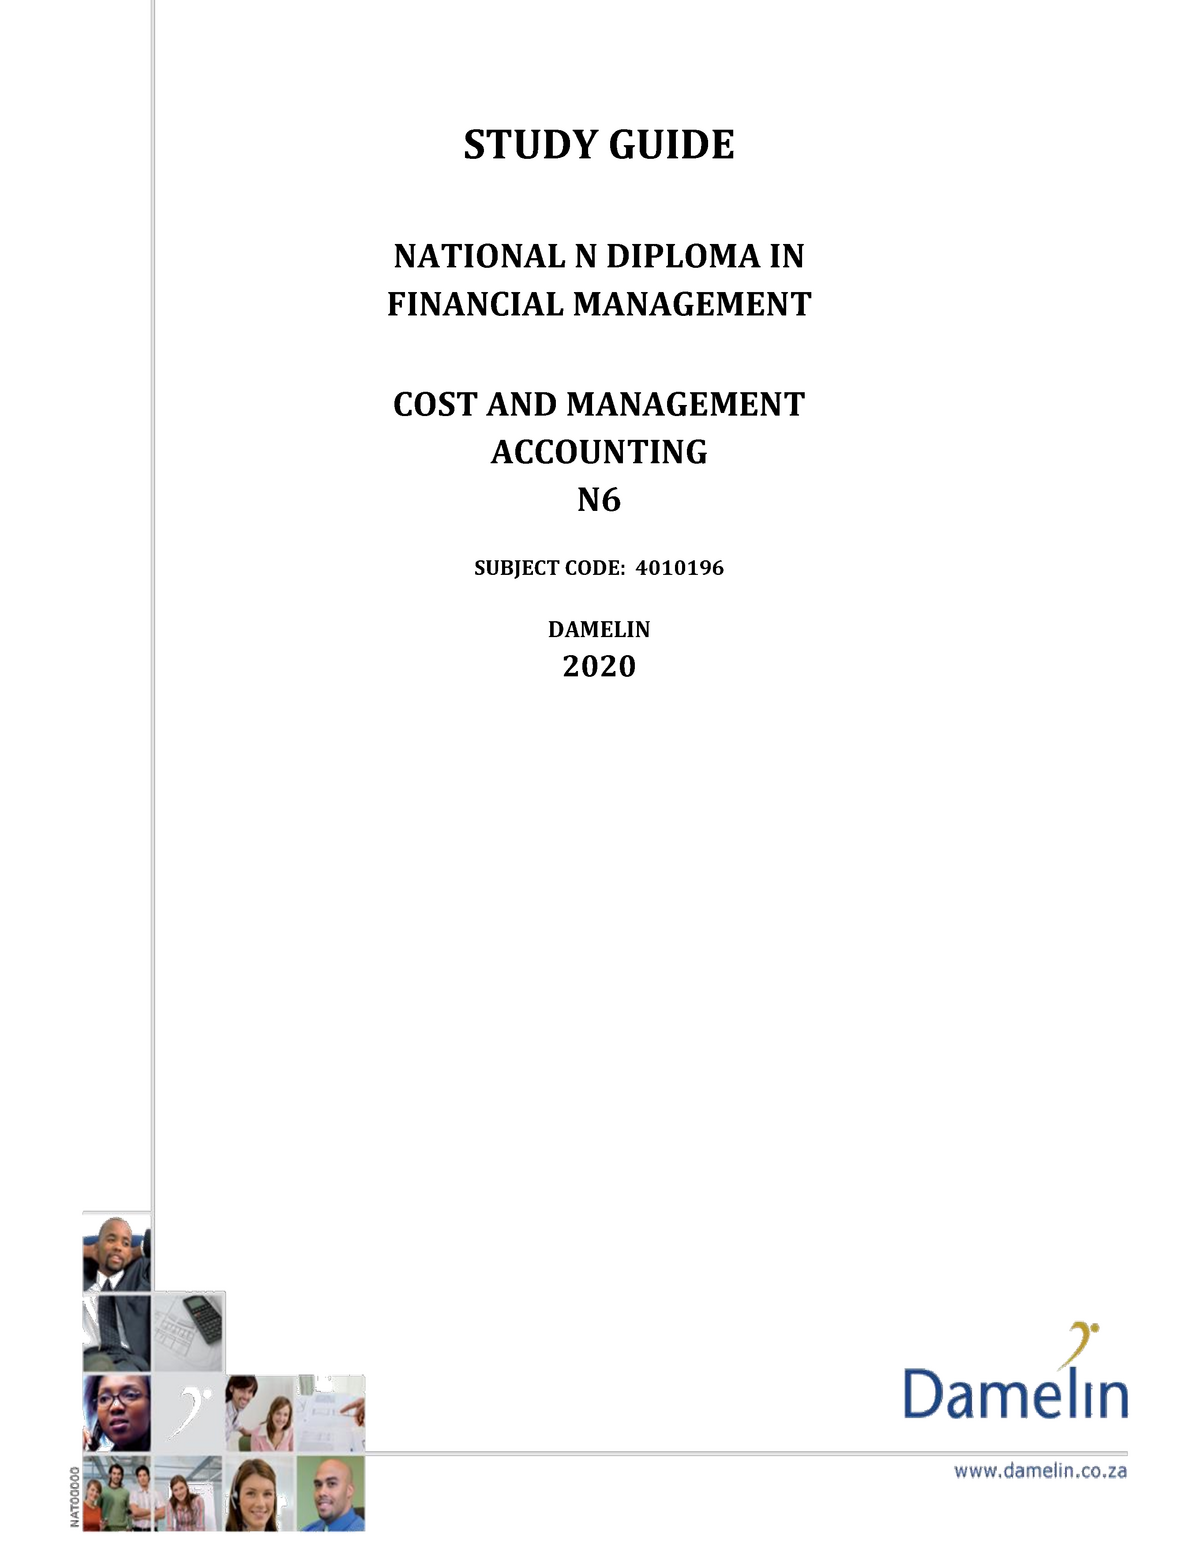 cost and management accounting assignment pdf